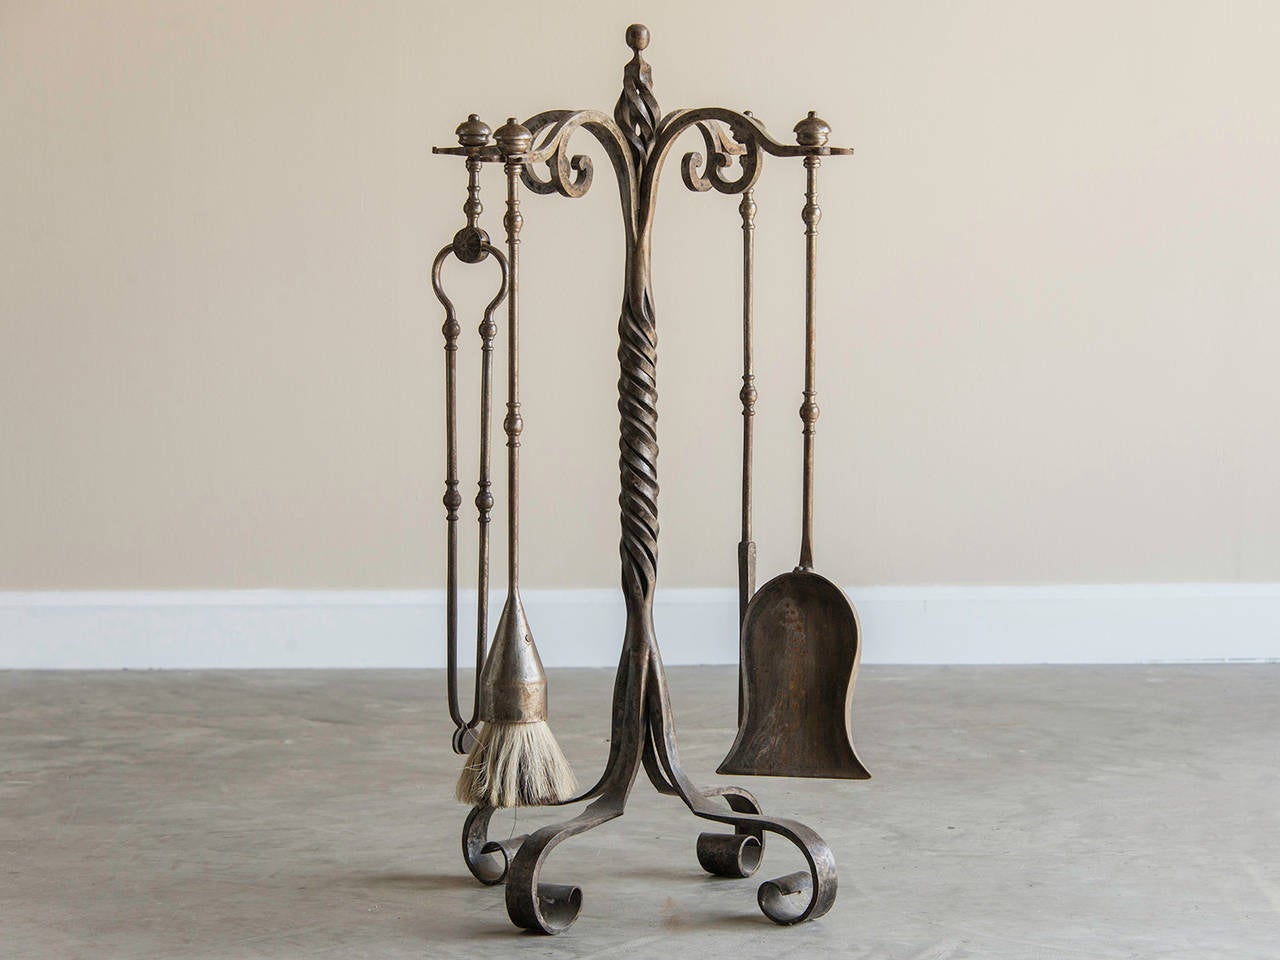 Receive our new selections direct from 1stdibs by email each week. Please click “Follow Dealer” button below and see them first!

This impressive Vintage set of fireplace accessories circa 1920 features four essential tools for tending a fire in an